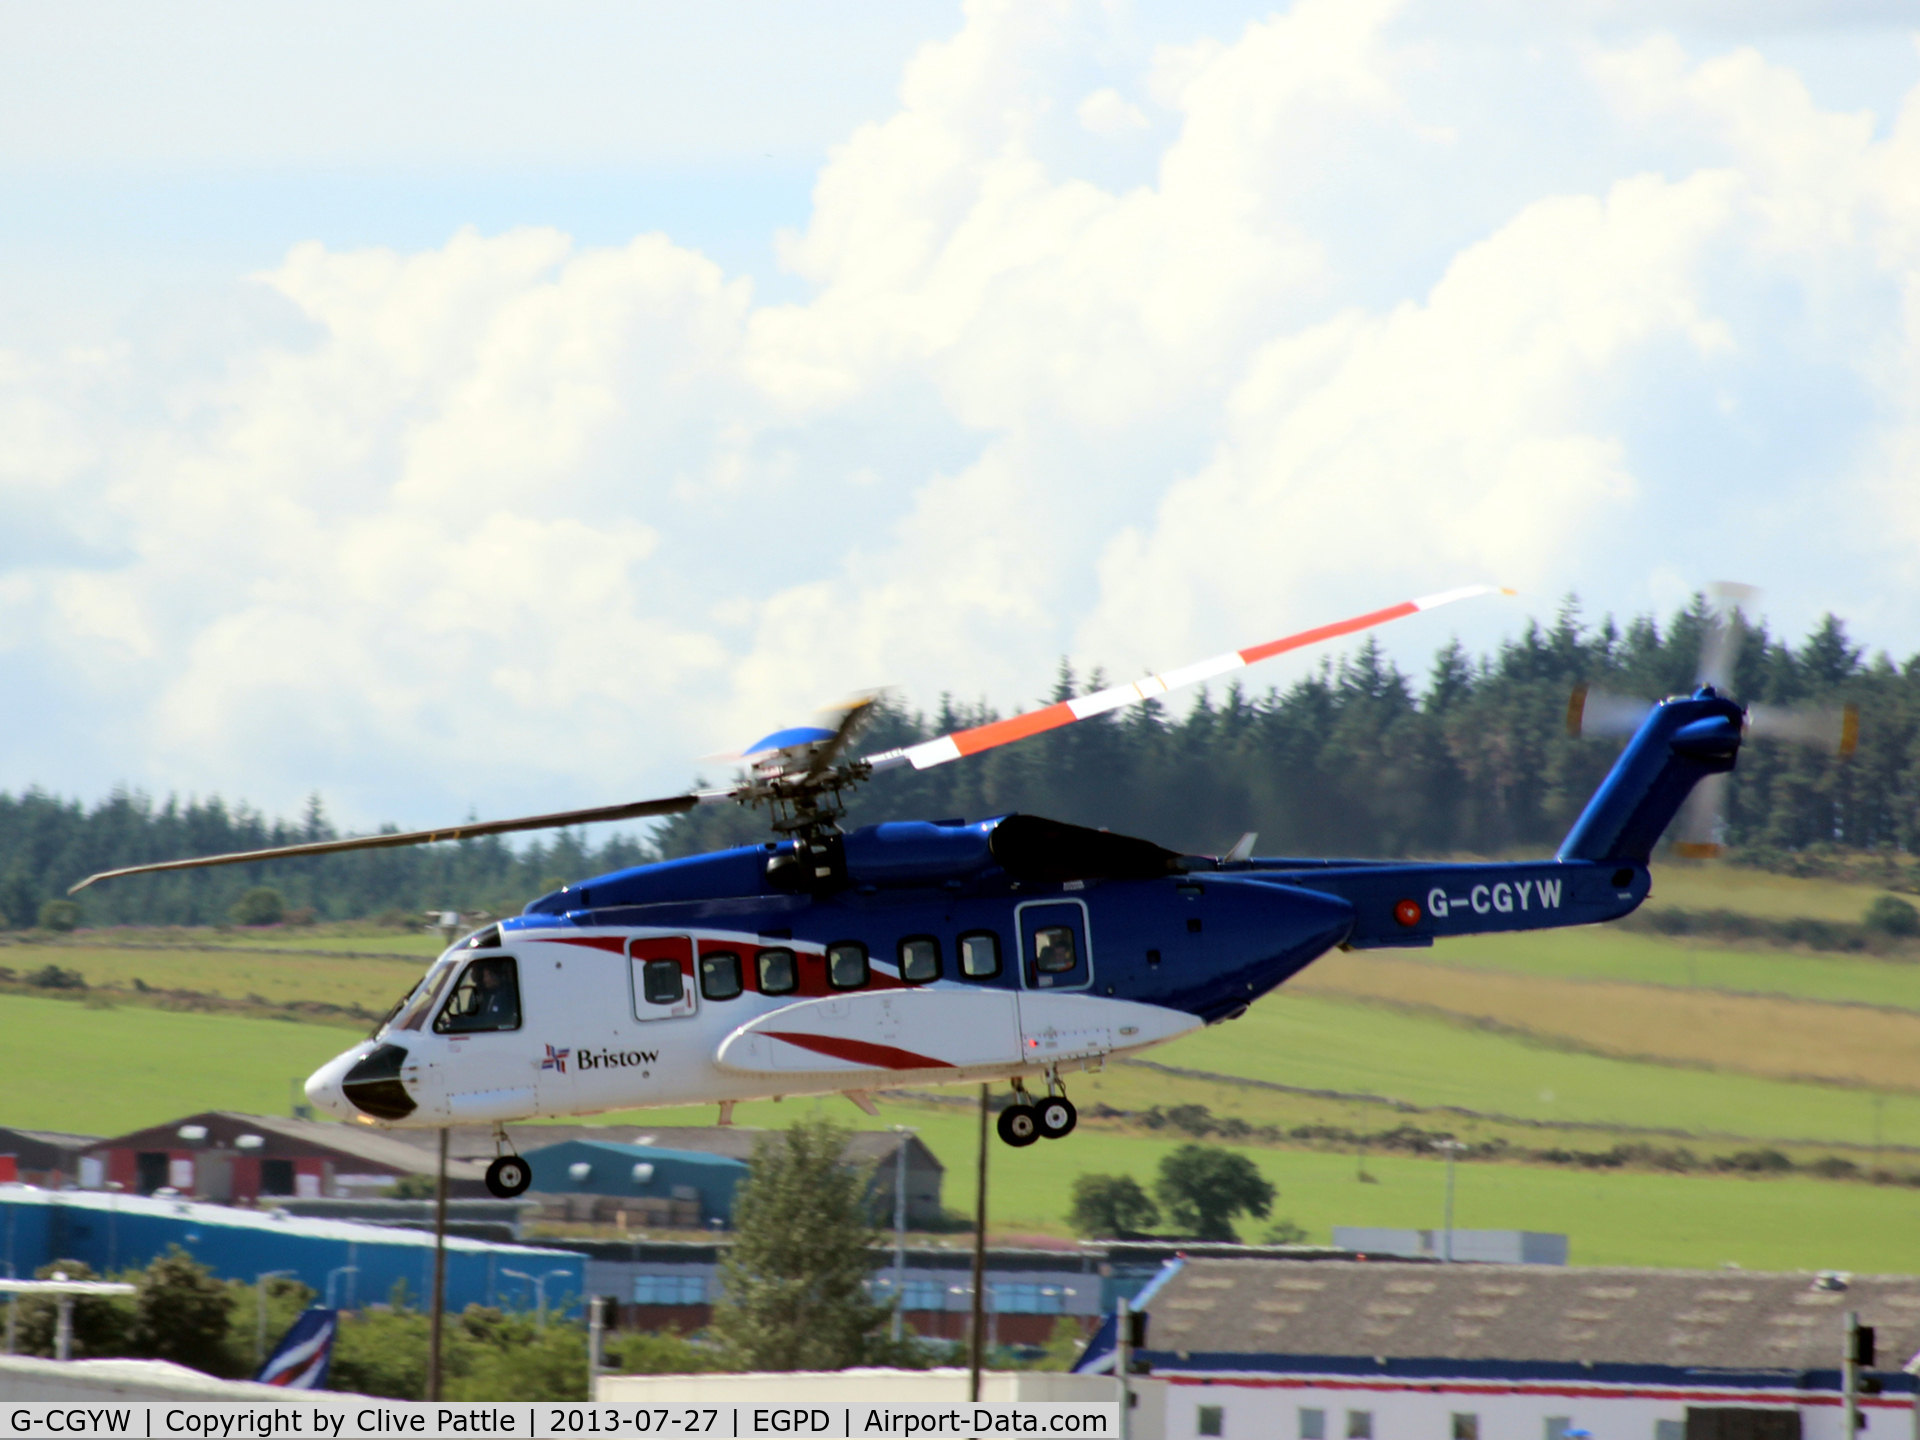 G-CGYW, 2011 Sikorsky S-92A C/N 920157, at Aberdeen EGPD departure